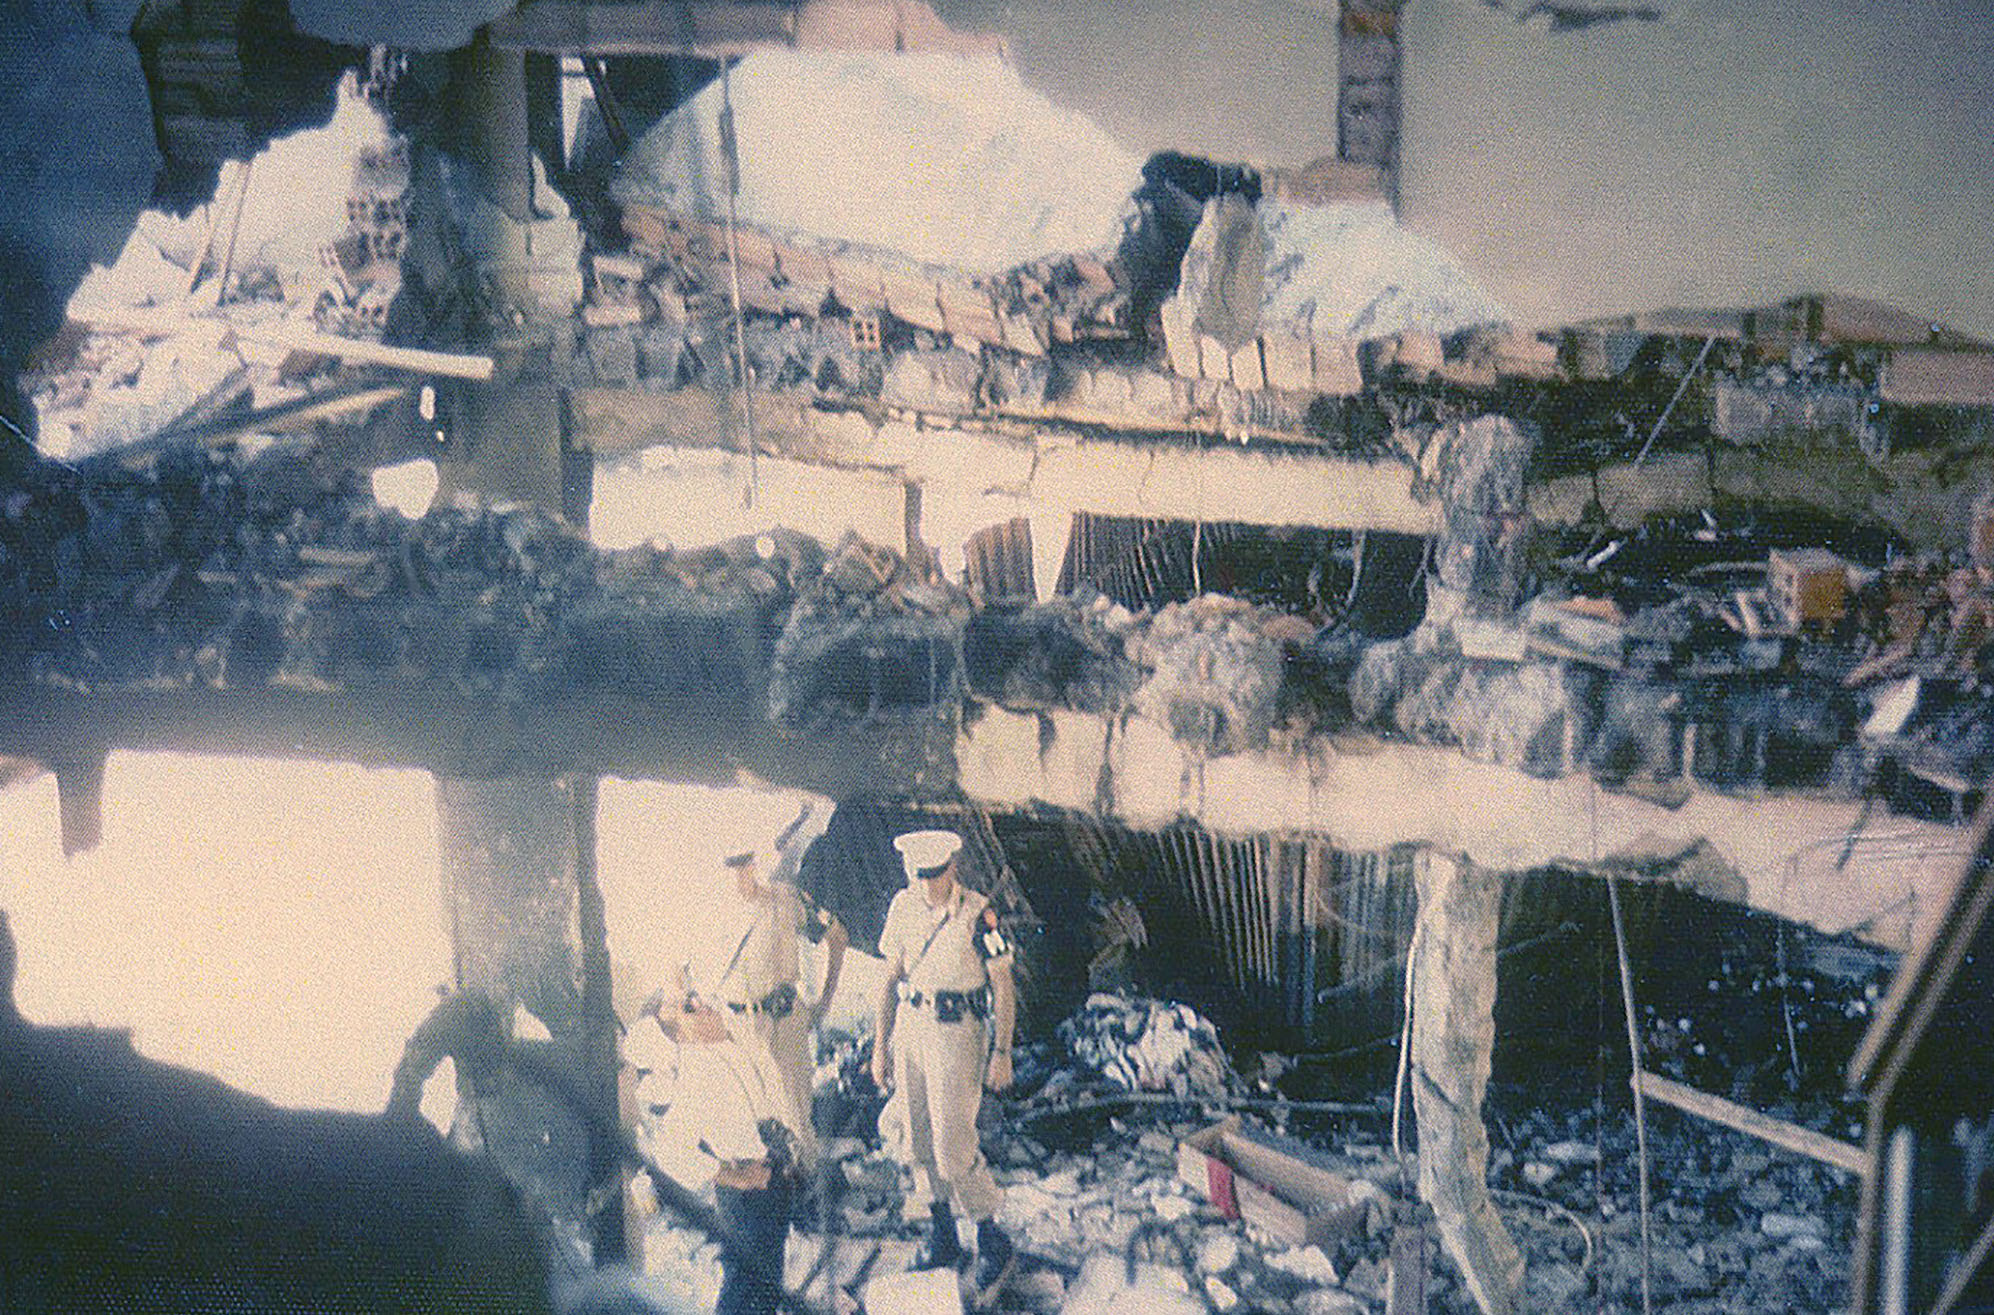 Two MPs and another man inspect the damage in the room next to Reynolds’ quarters. One of the men staying there was a friend of Reynolds and died in her presence at the hospital. / Courtesy Ann Darby Reynolds